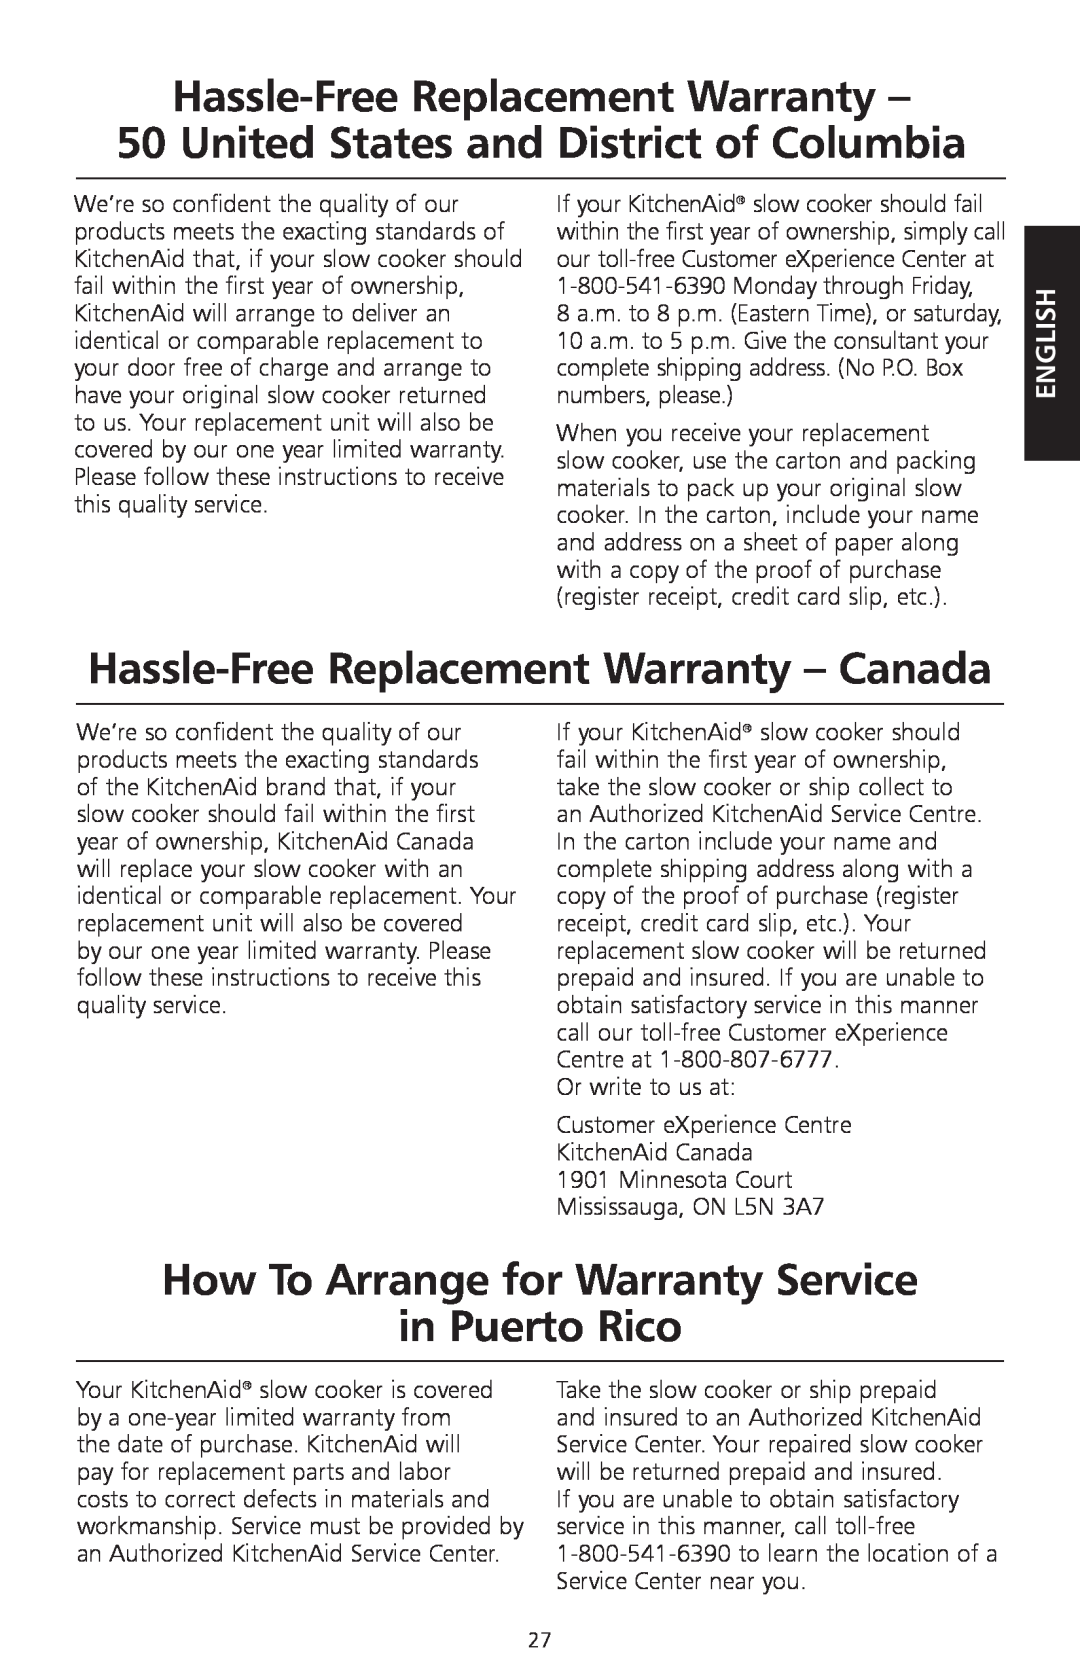 KitchenAid KSC700 manual Hassle-FreeReplacement Warranty, United States and District of Columbia, in Puerto Rico, English 